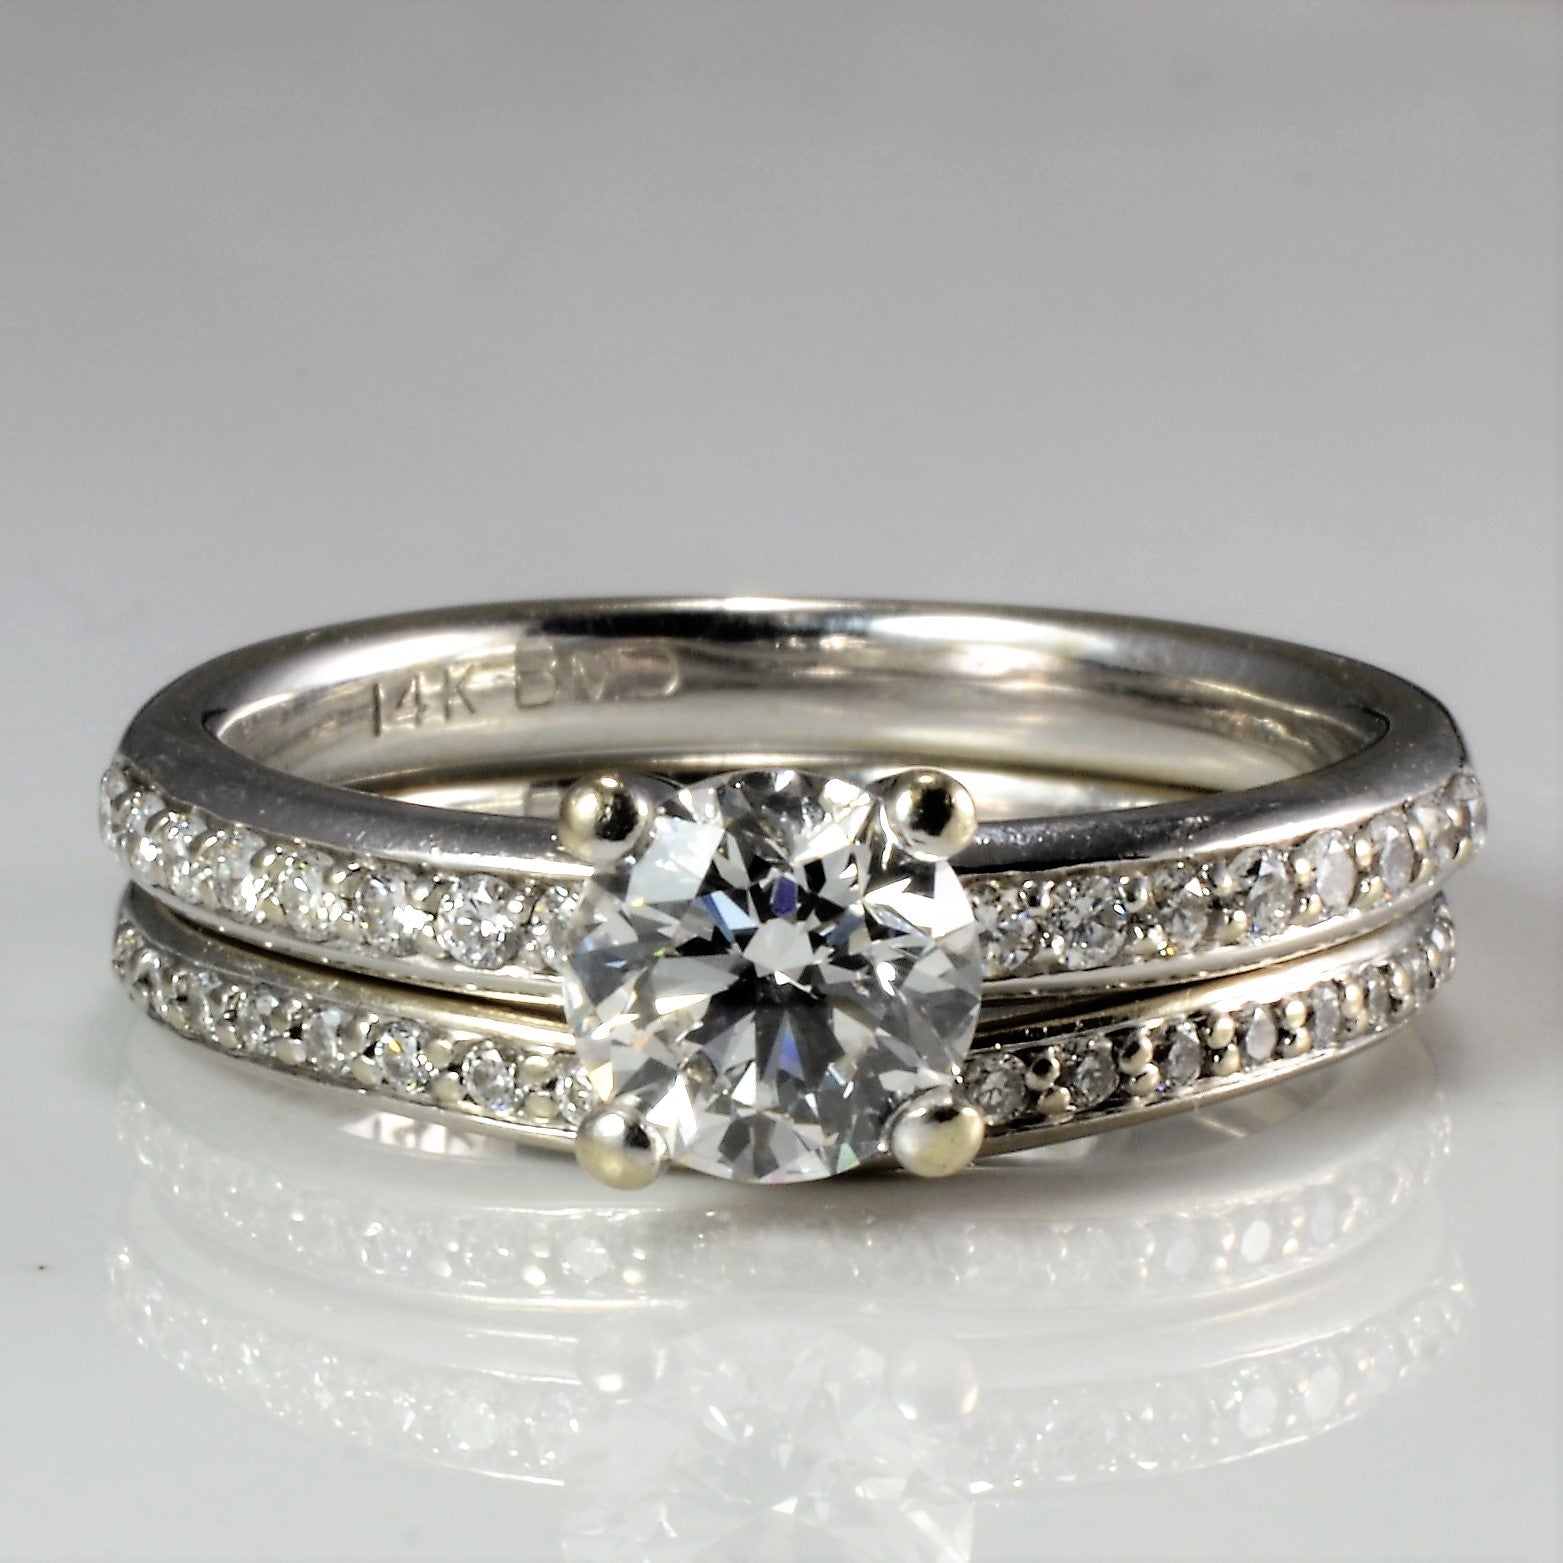 Solitaire with Accents Diamond Engagement Ring Set | 1.05 ctw, SZ 5.75 |